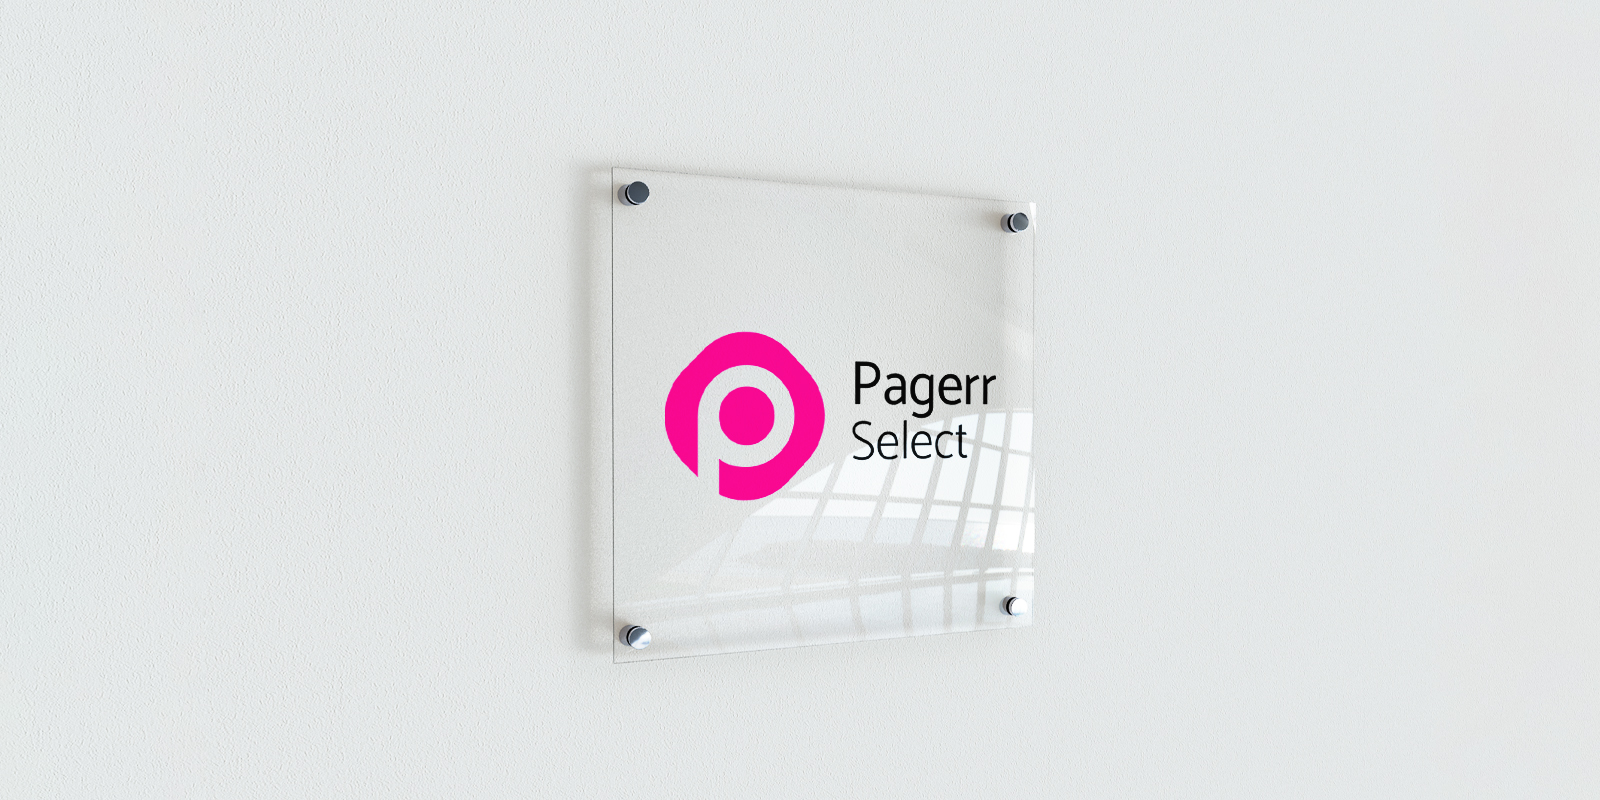 Acrylic signs in Wollongong - Print with Pagerr